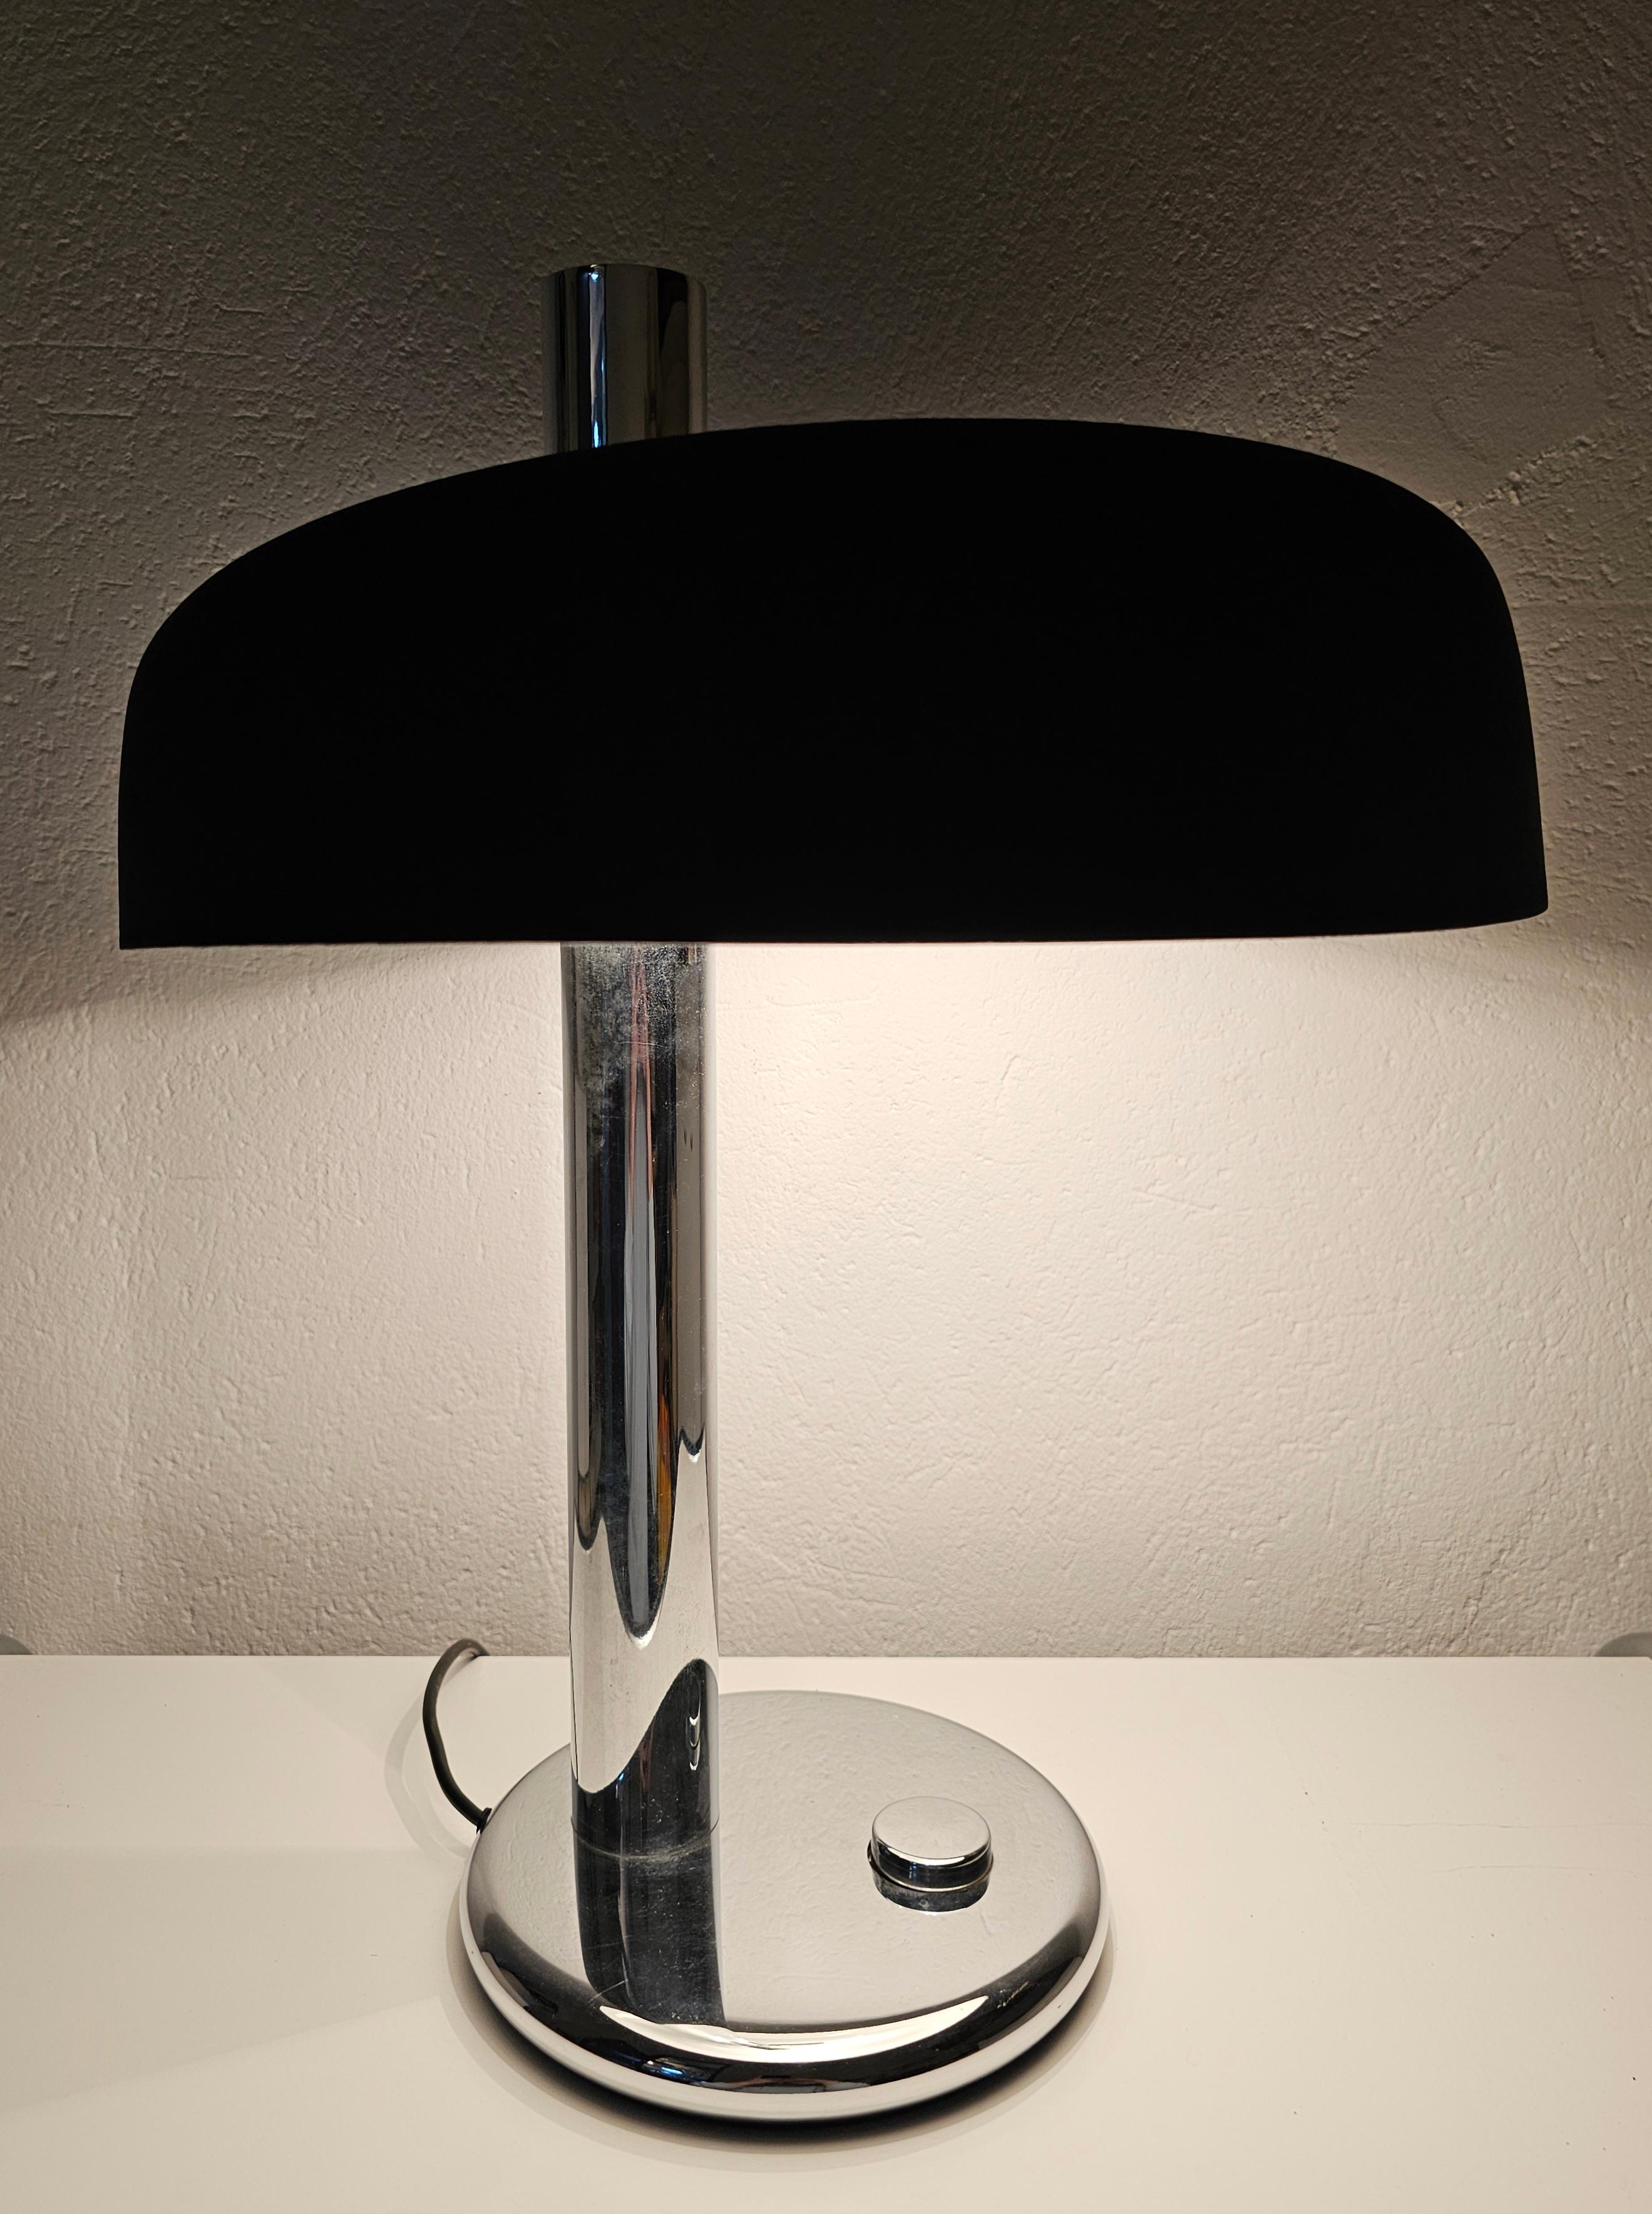 Bauhaus Style Table Lamp Model 7603 designed by Heinz Pfaender for Hillebrand  For Sale 2